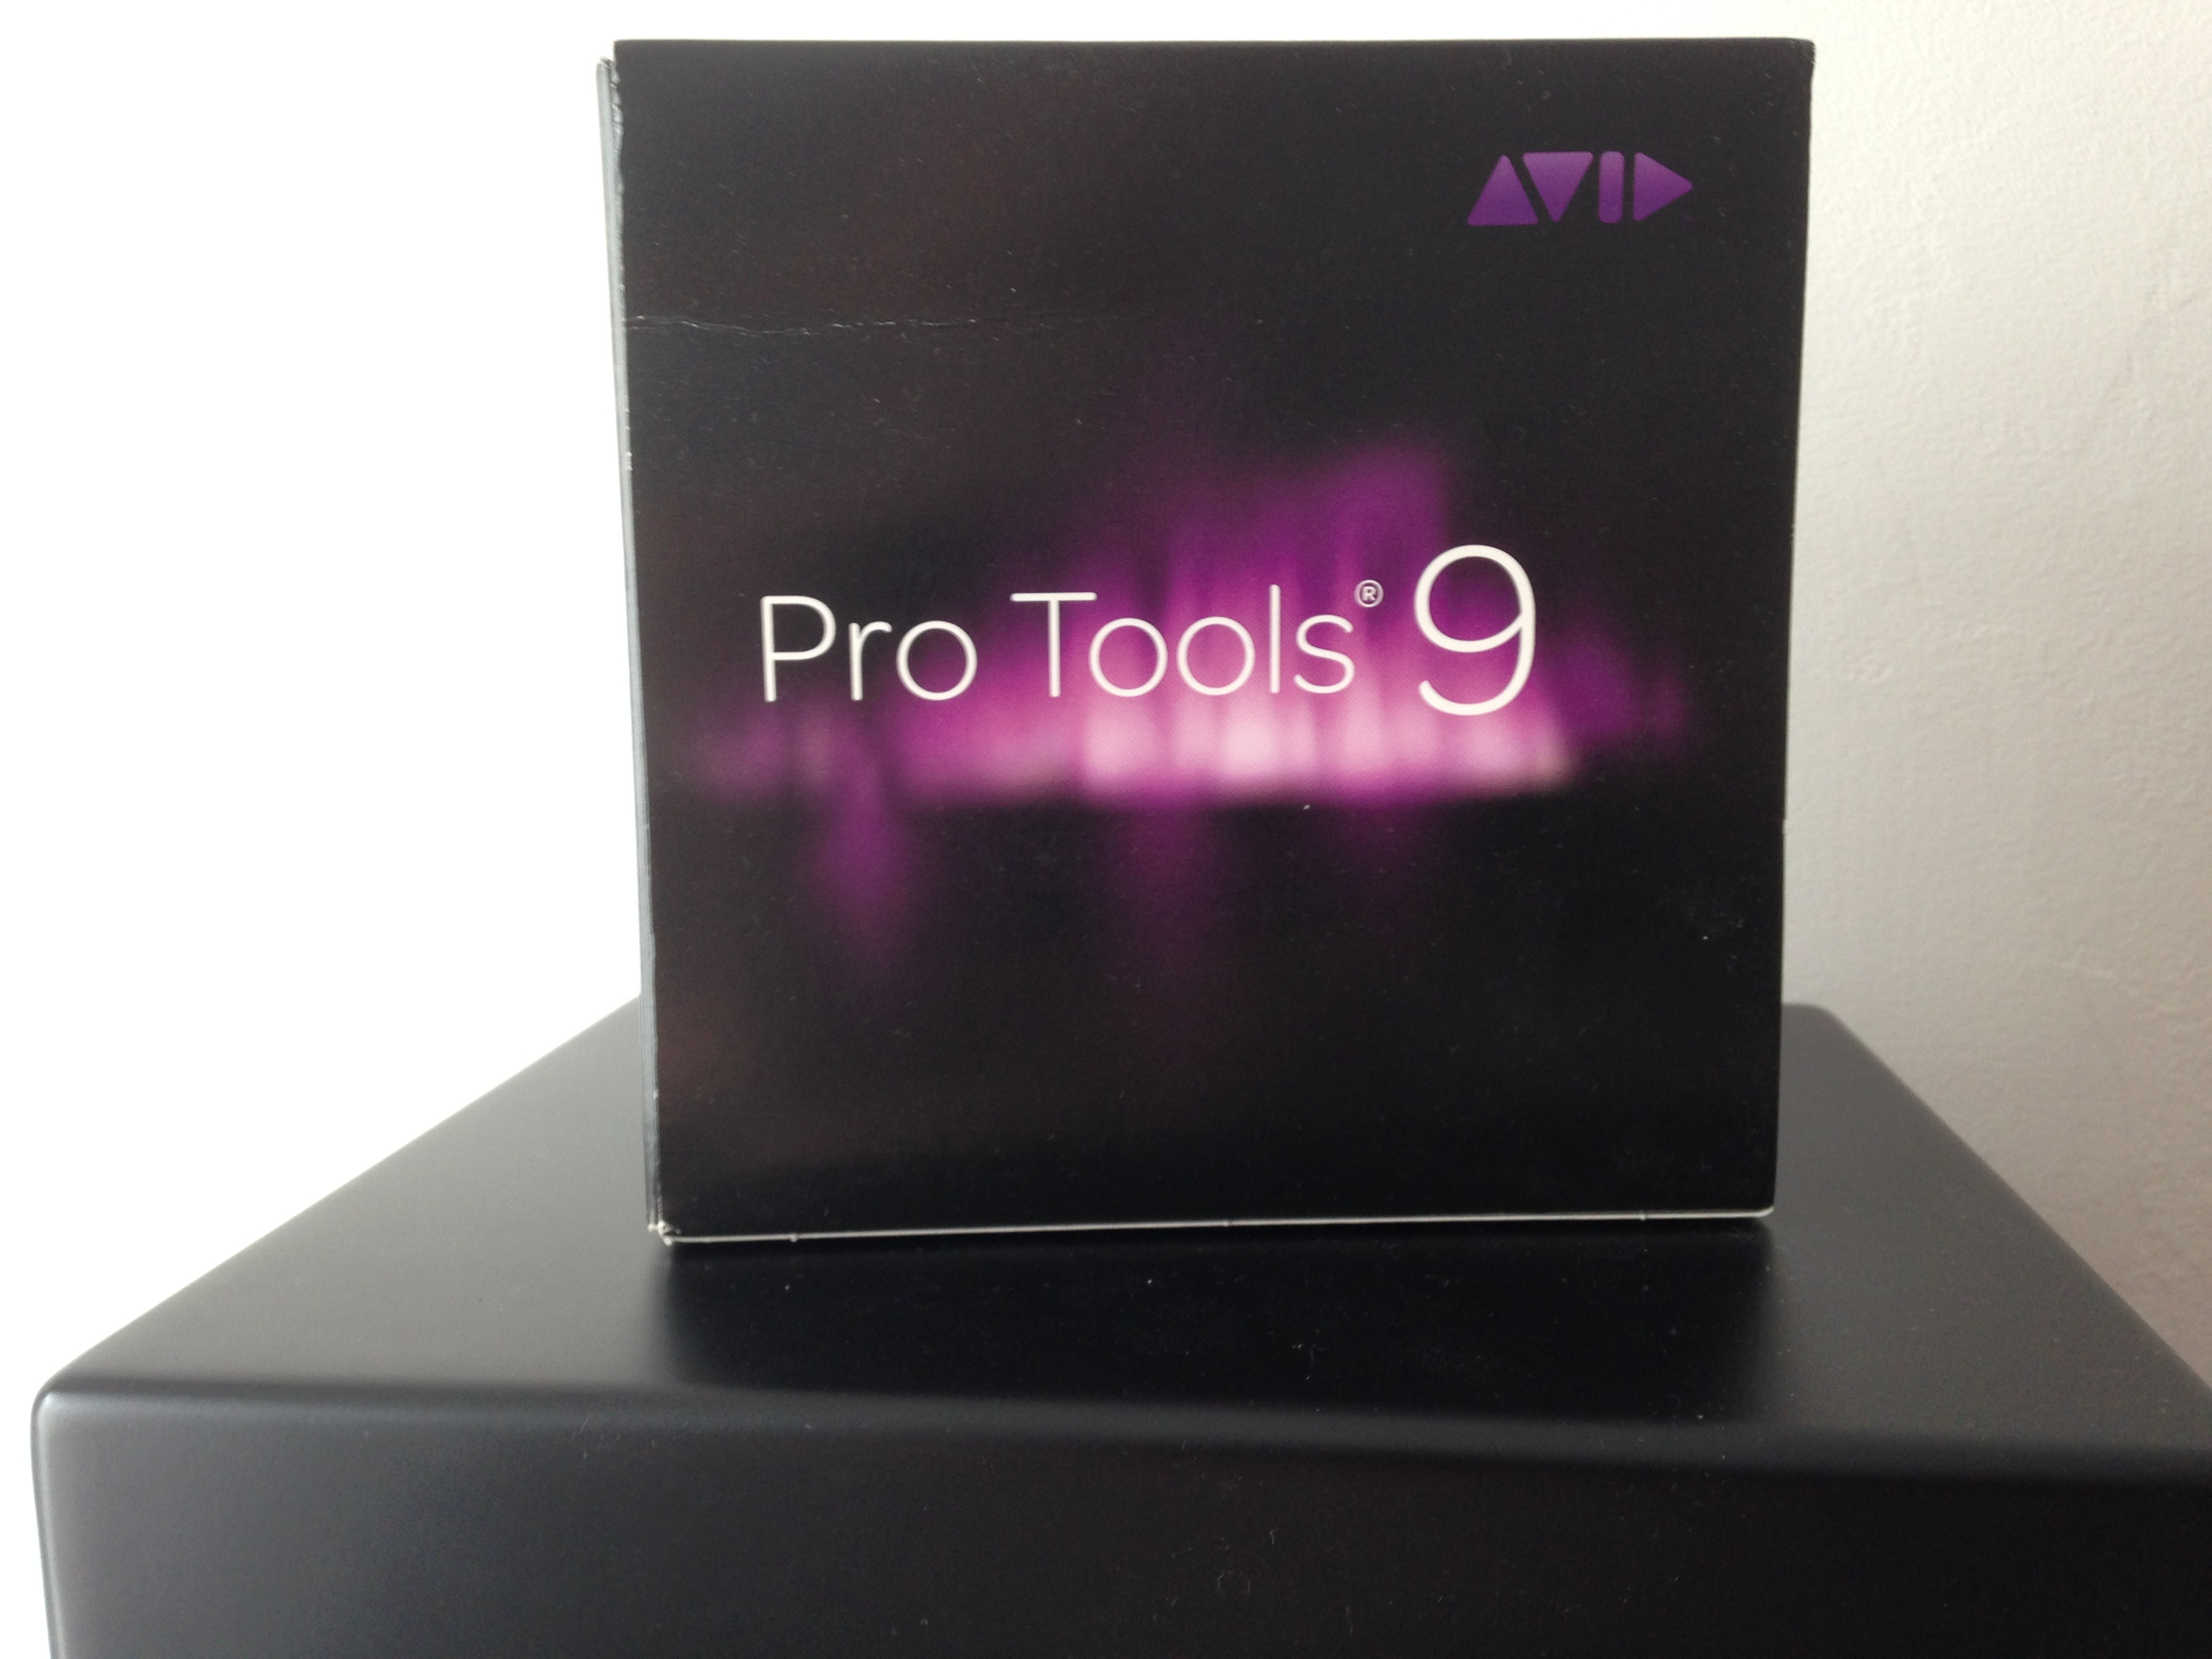 pro tools 9 free download full version cracked windows